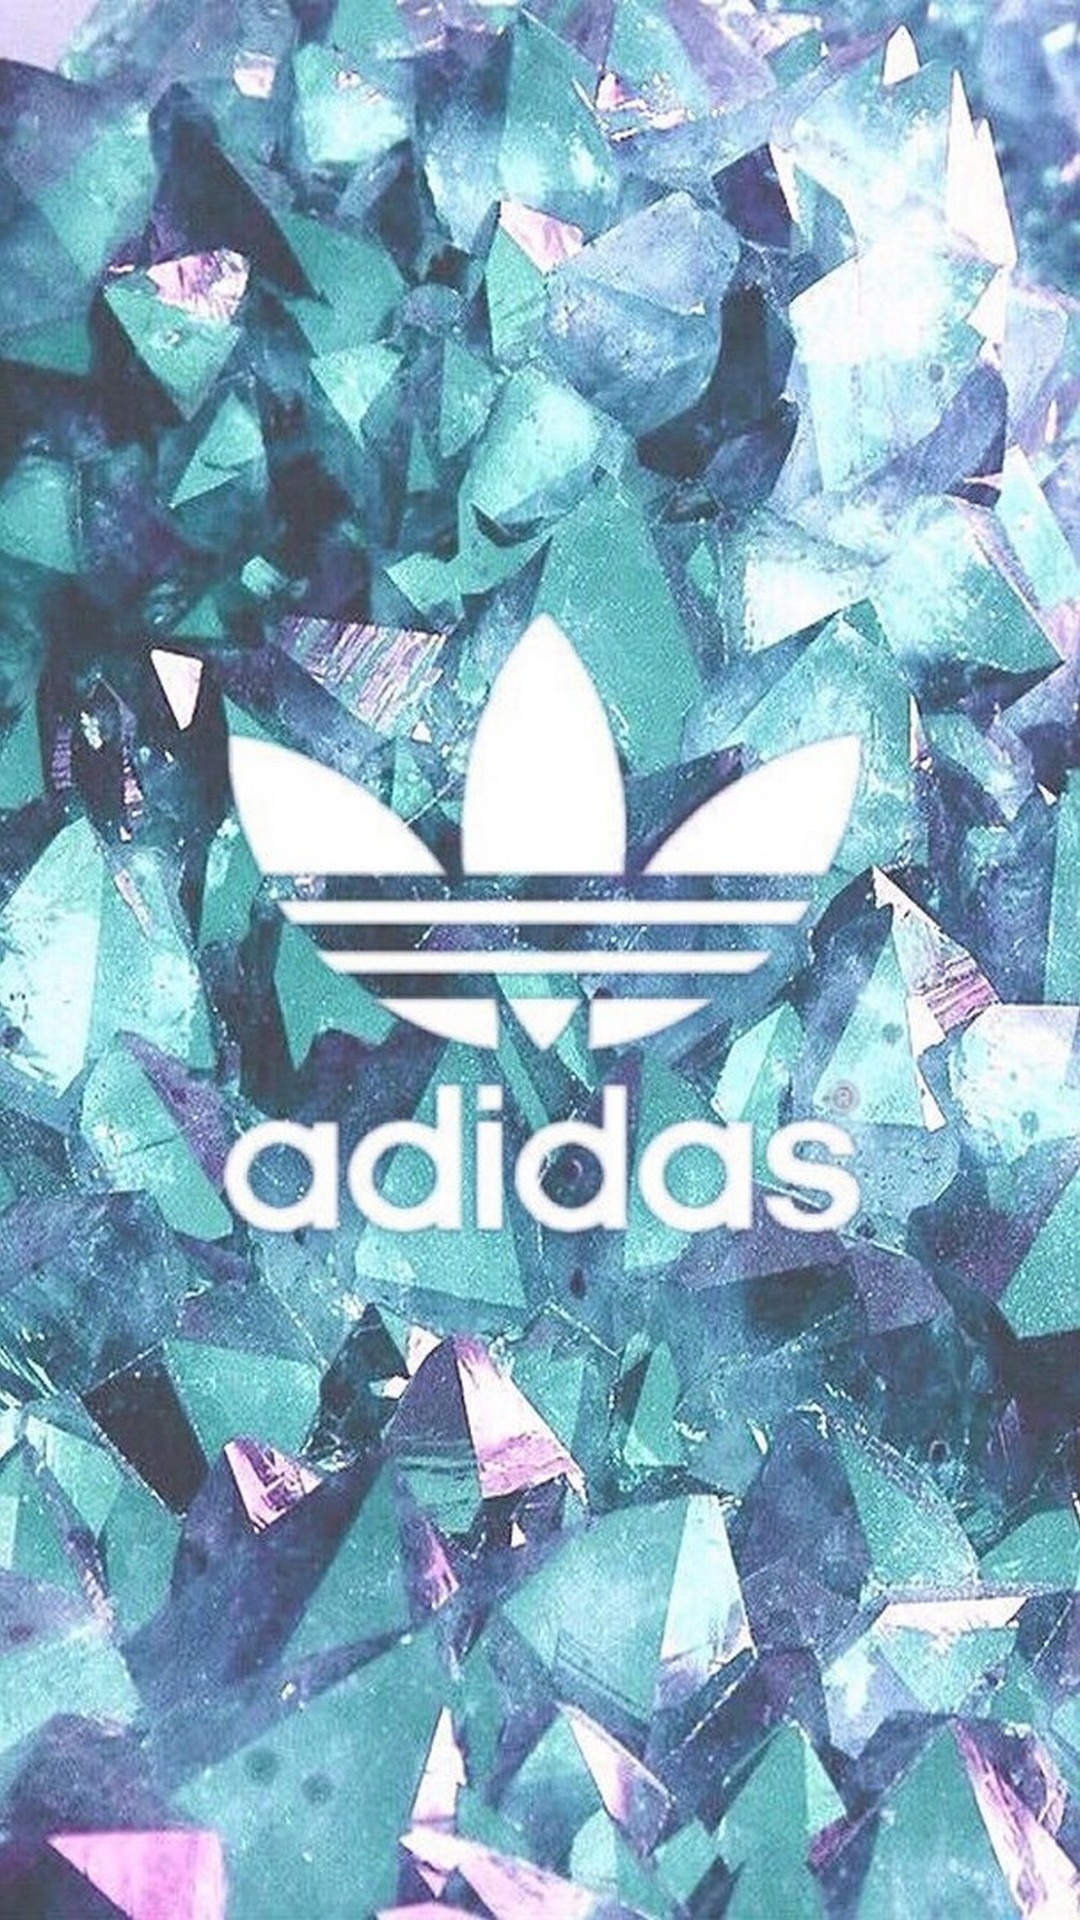 Adidas Logo iPhone Wallpaper HD With high-resolution 1080X1920 pixel. You can set as wallpaper for Apple iPhone X, XS Max, XR, 8, 7, 6, SE, iPad. Enjoy and share your favorite HD wallpapers and background images